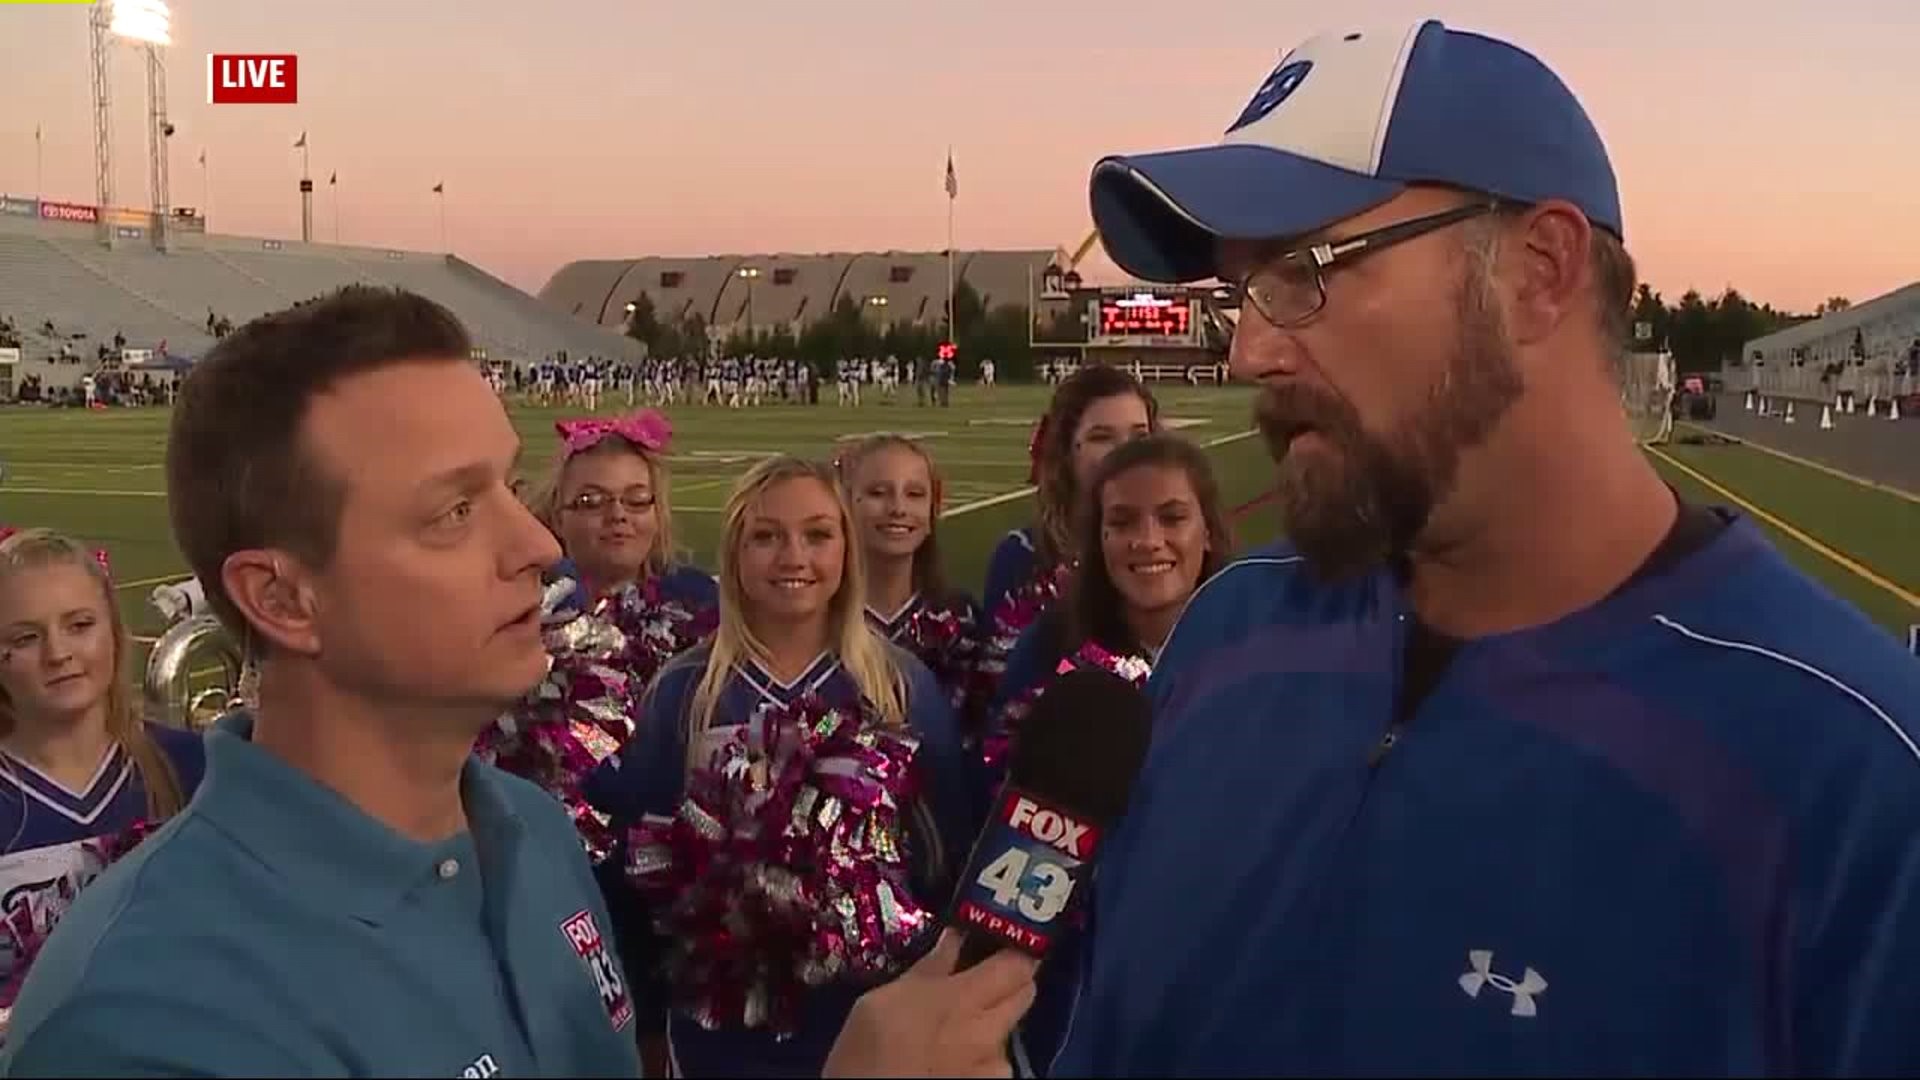 HSFF `Game of the Week` coaches interviews